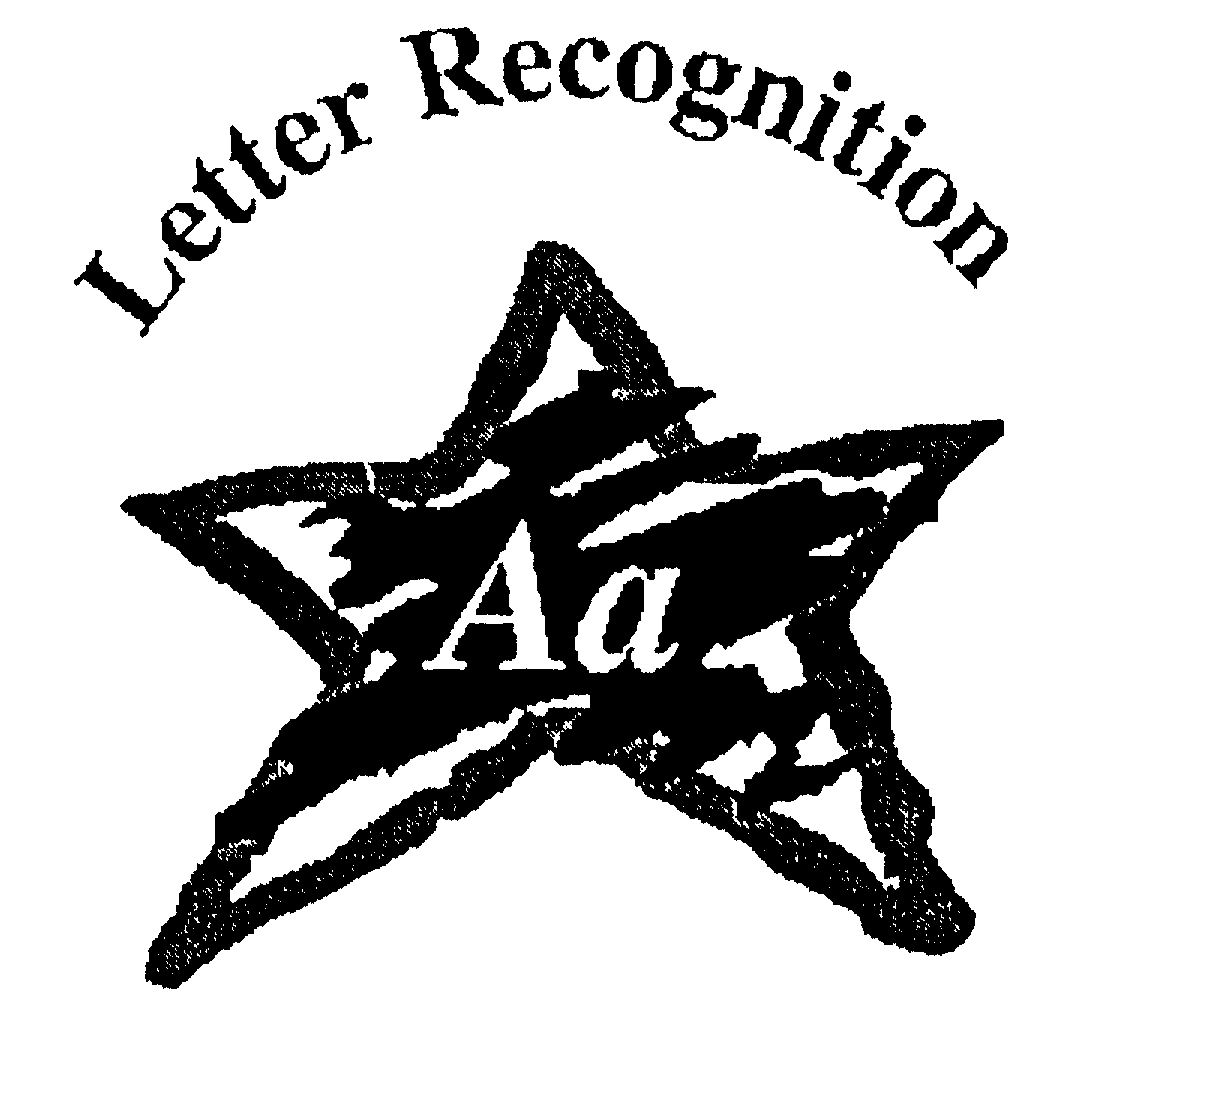  AA LETTER RECOGNITION